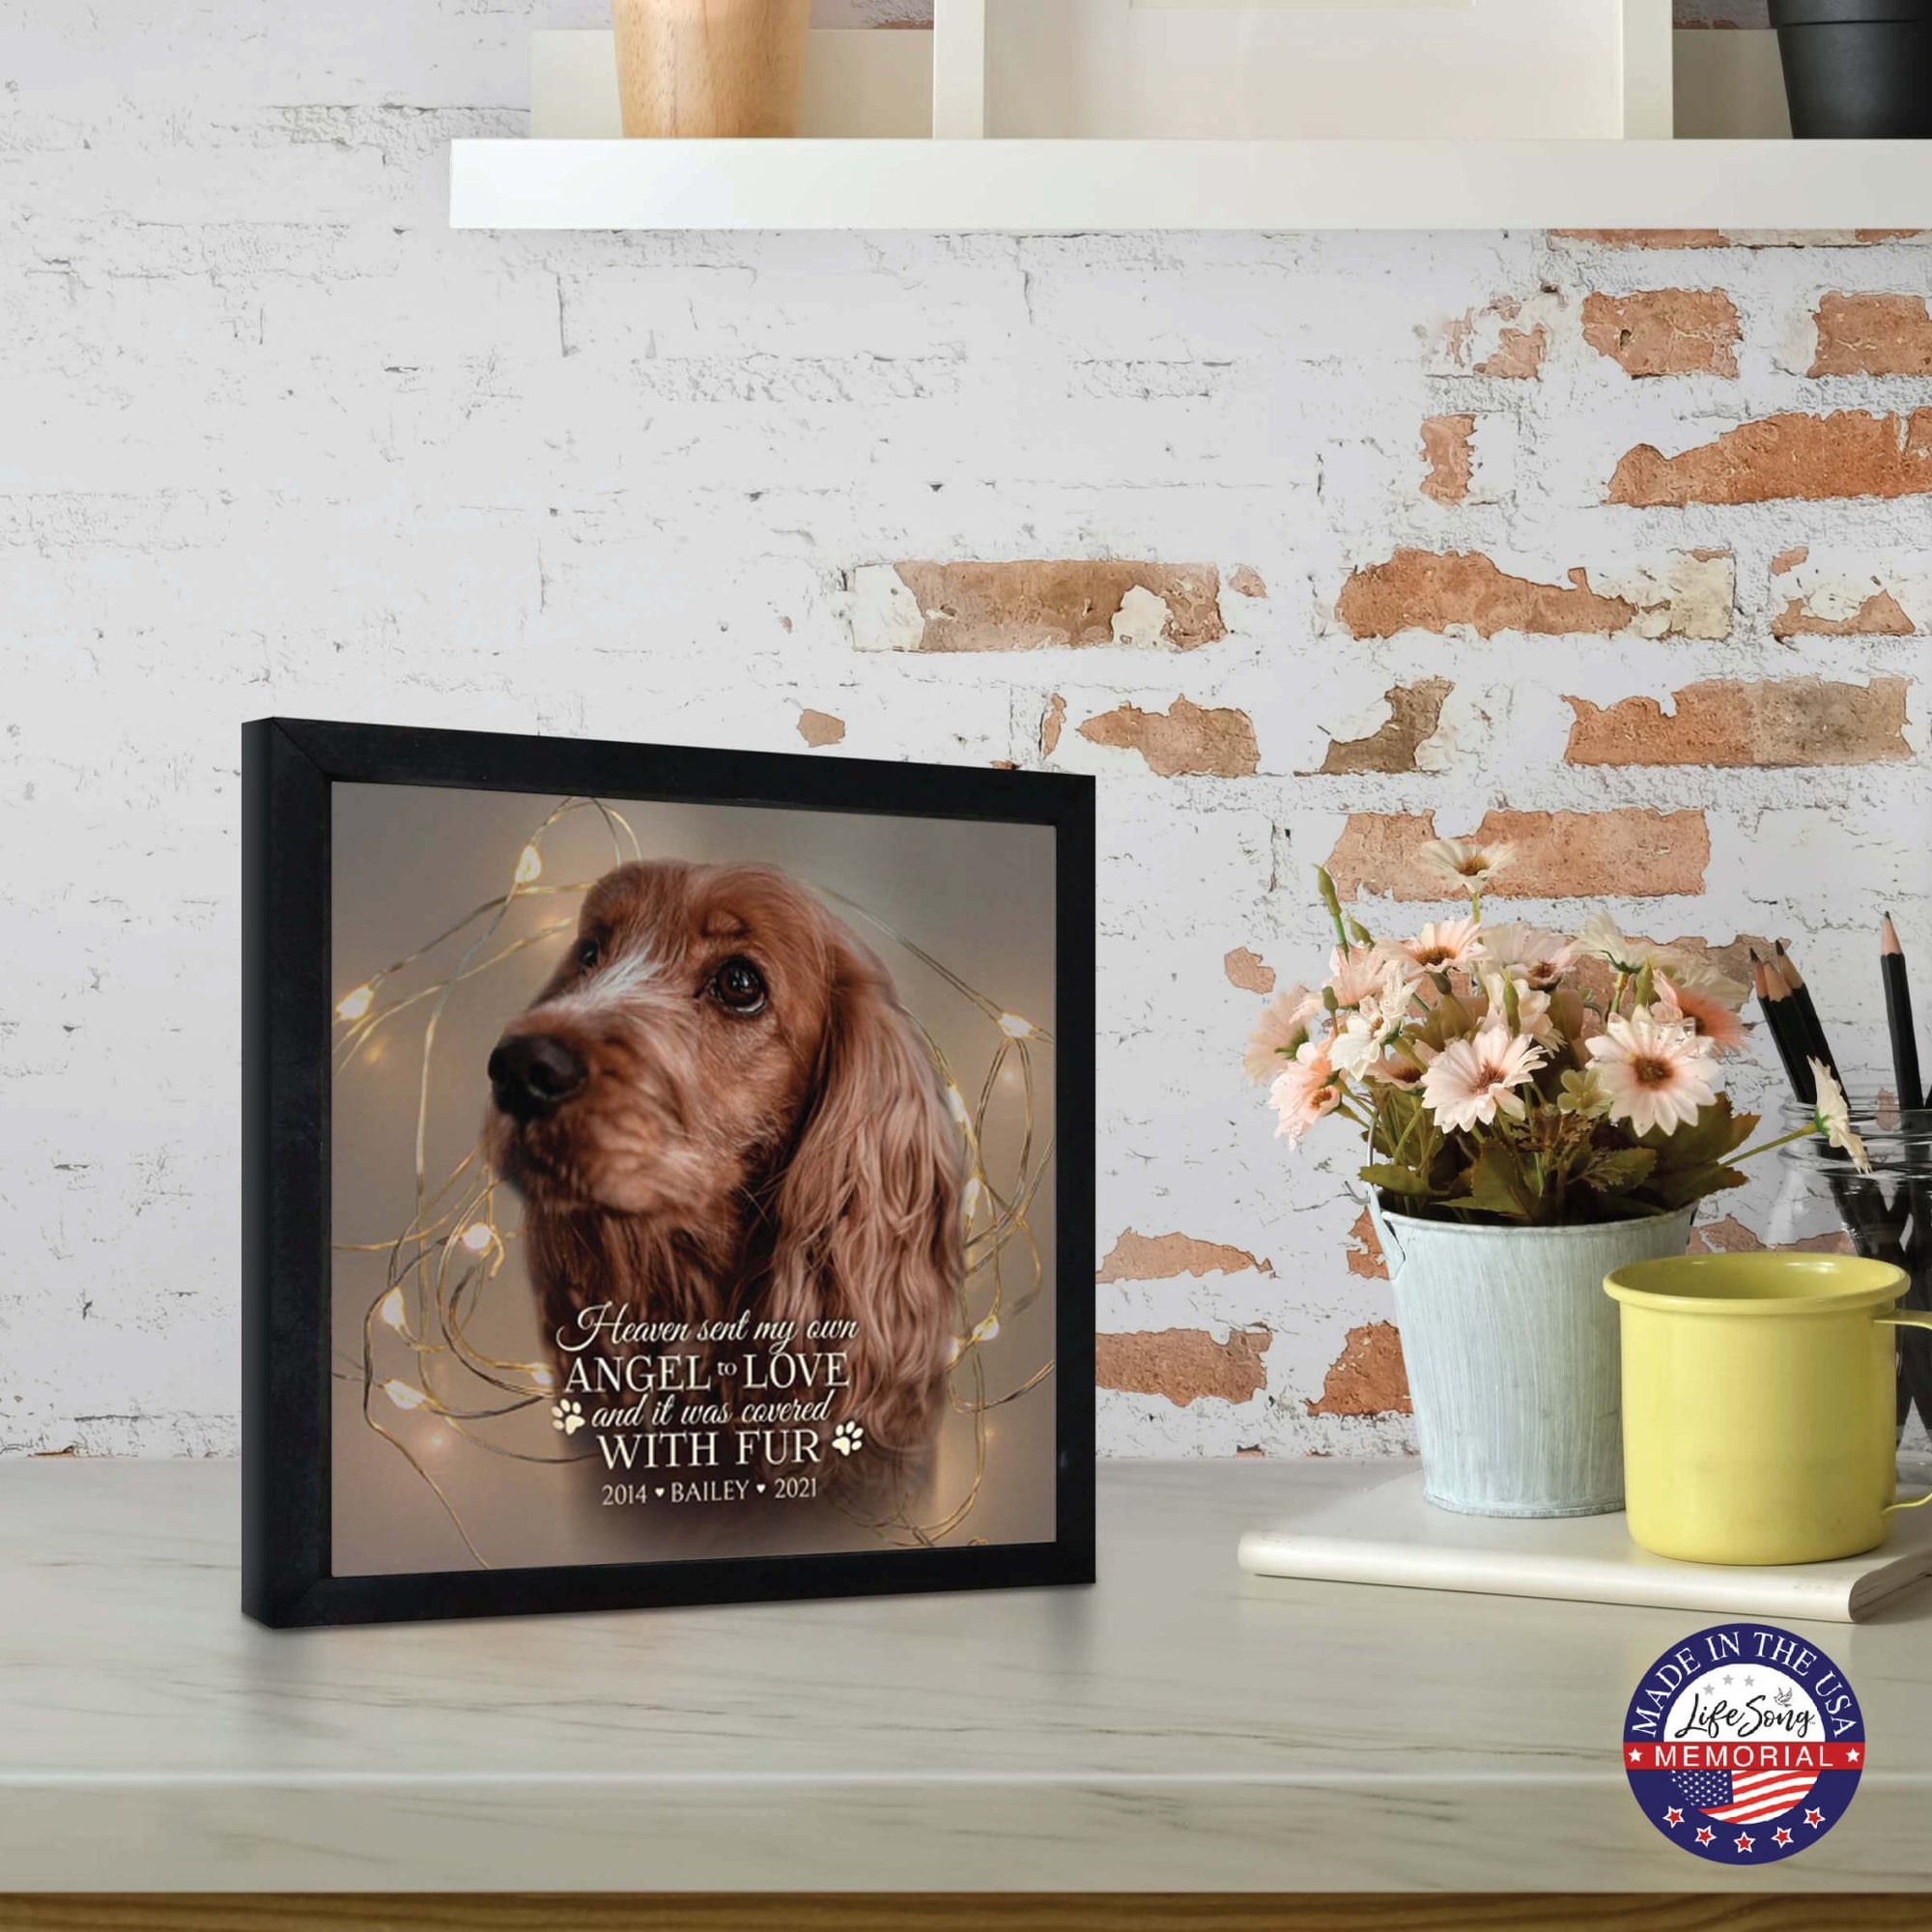 Custom Pet Memorial Framed Shadow Box Wall Décor for the Loss of Beloved Pet - Heaven Sent My Own - LifeSong Milestones